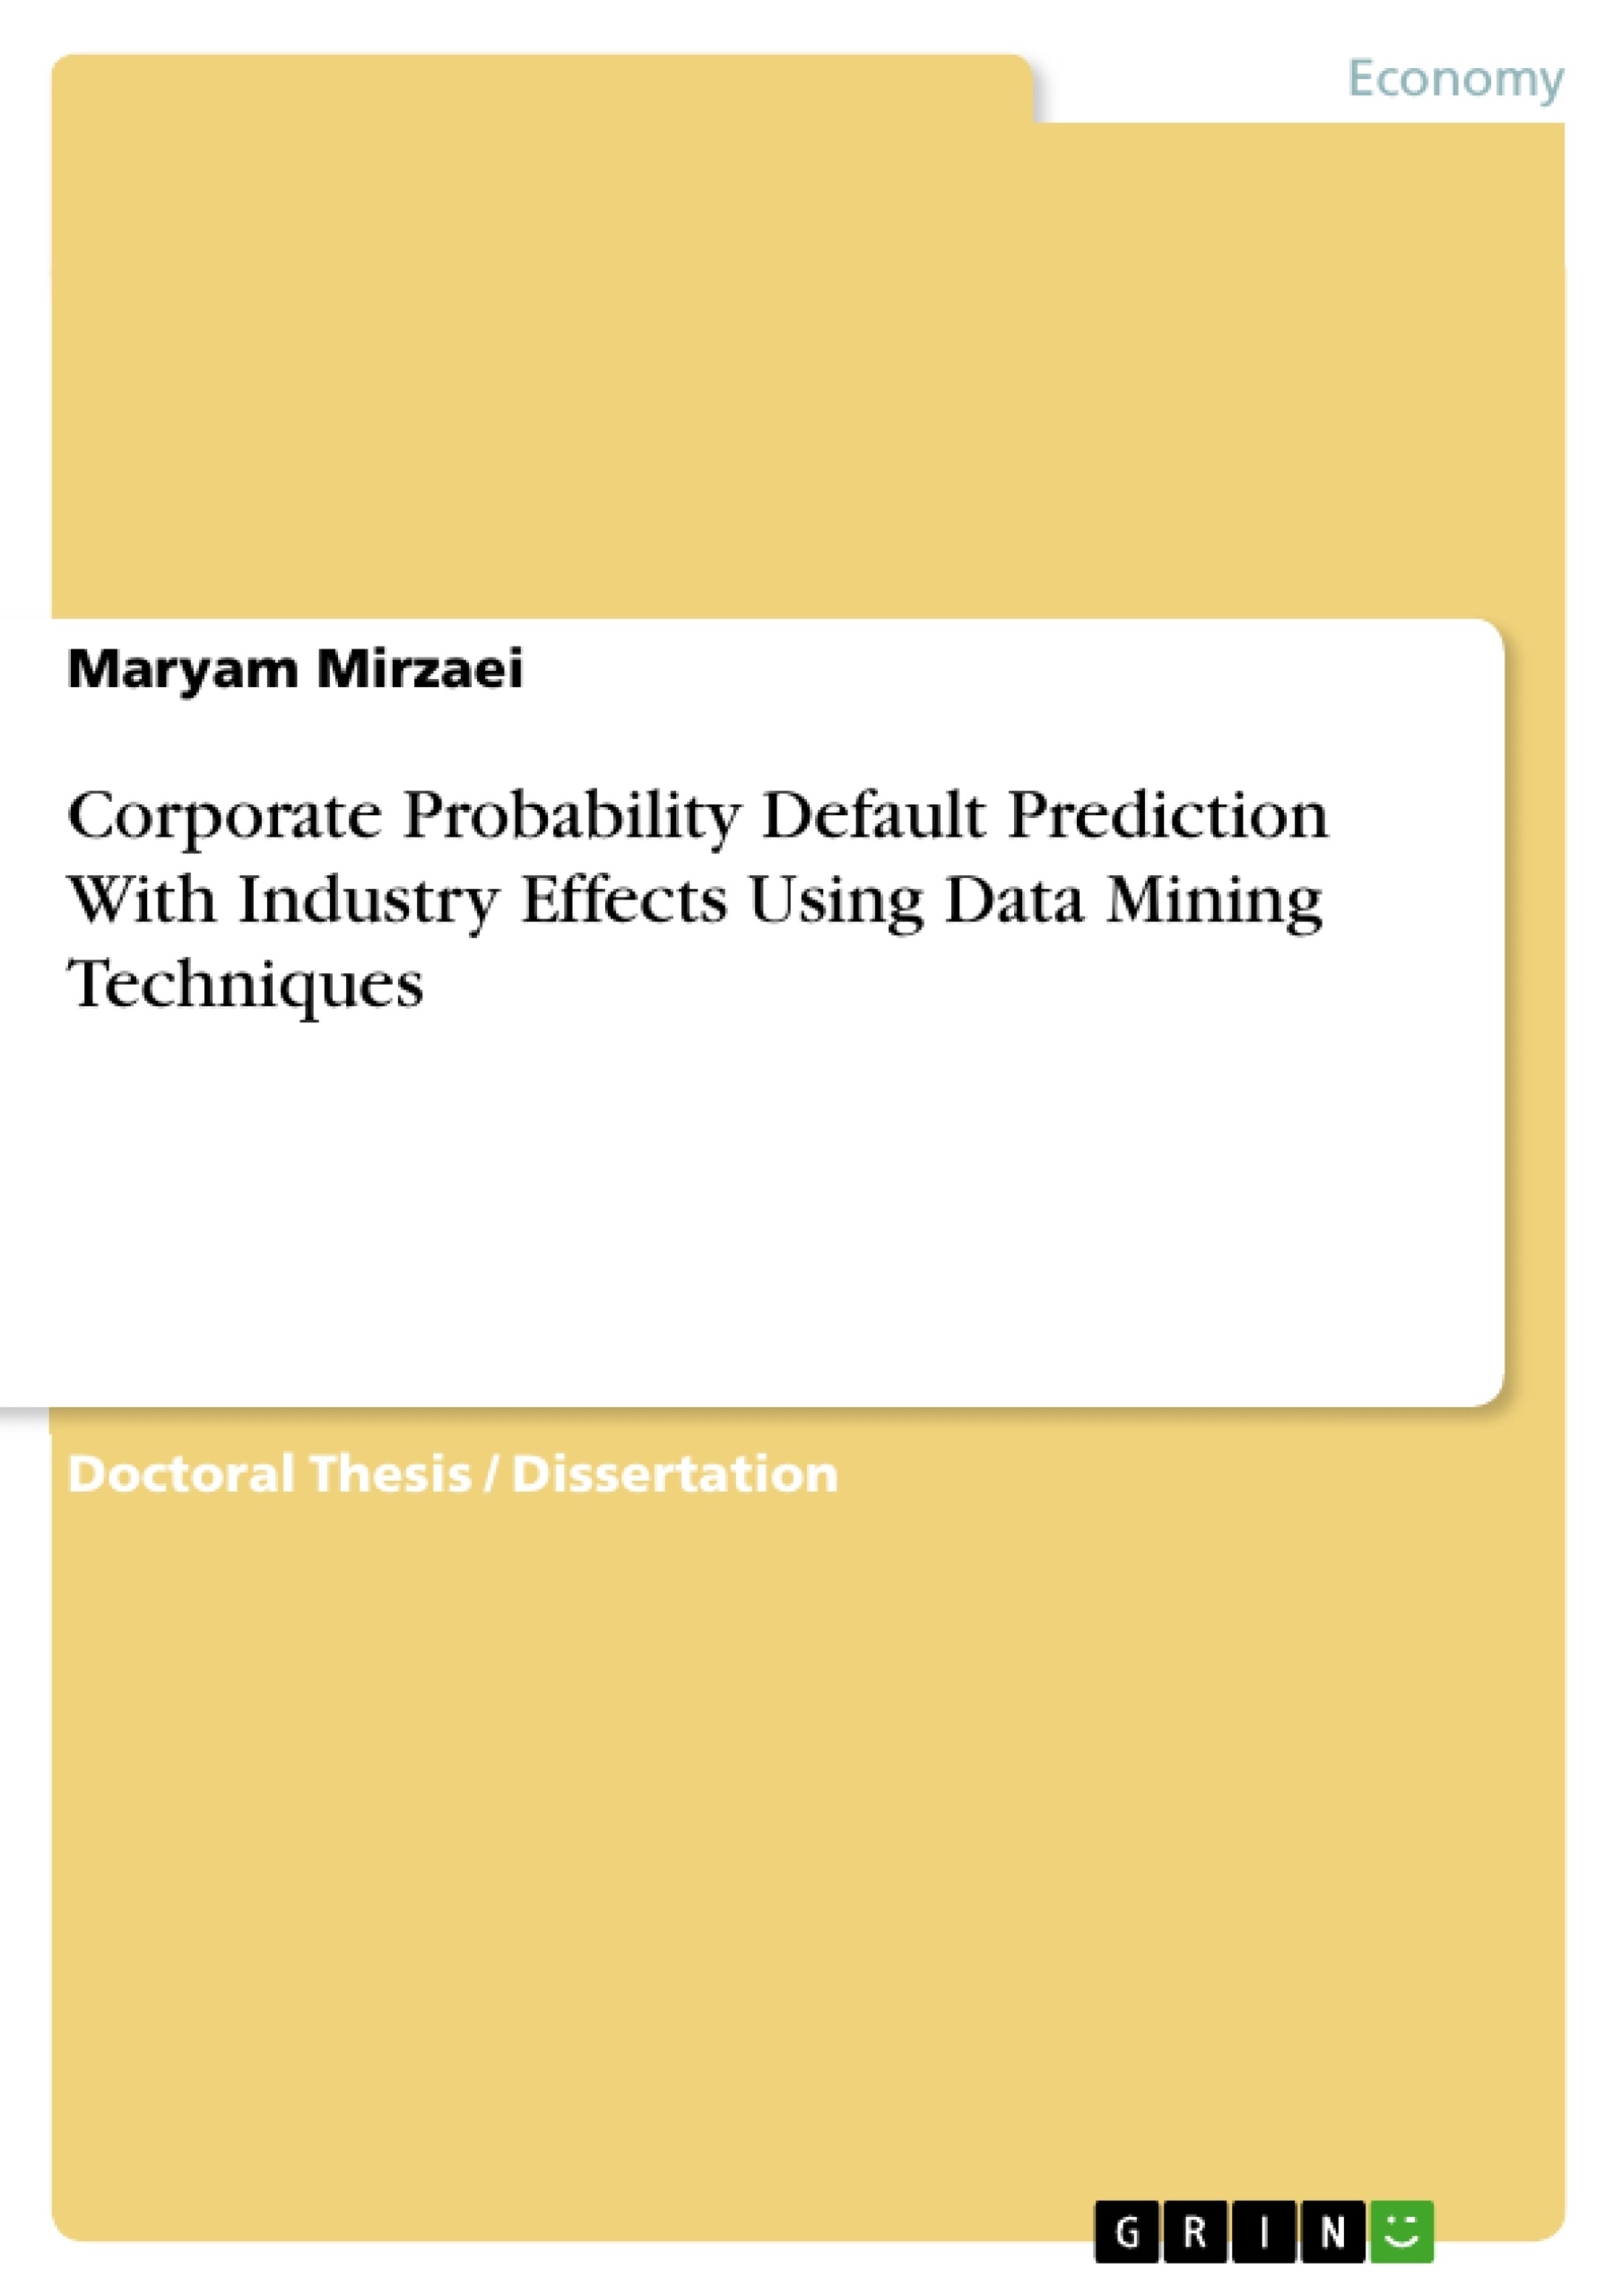 Titre: Corporate Probability Default Prediction With Industry Effects Using Data Mining Techniques